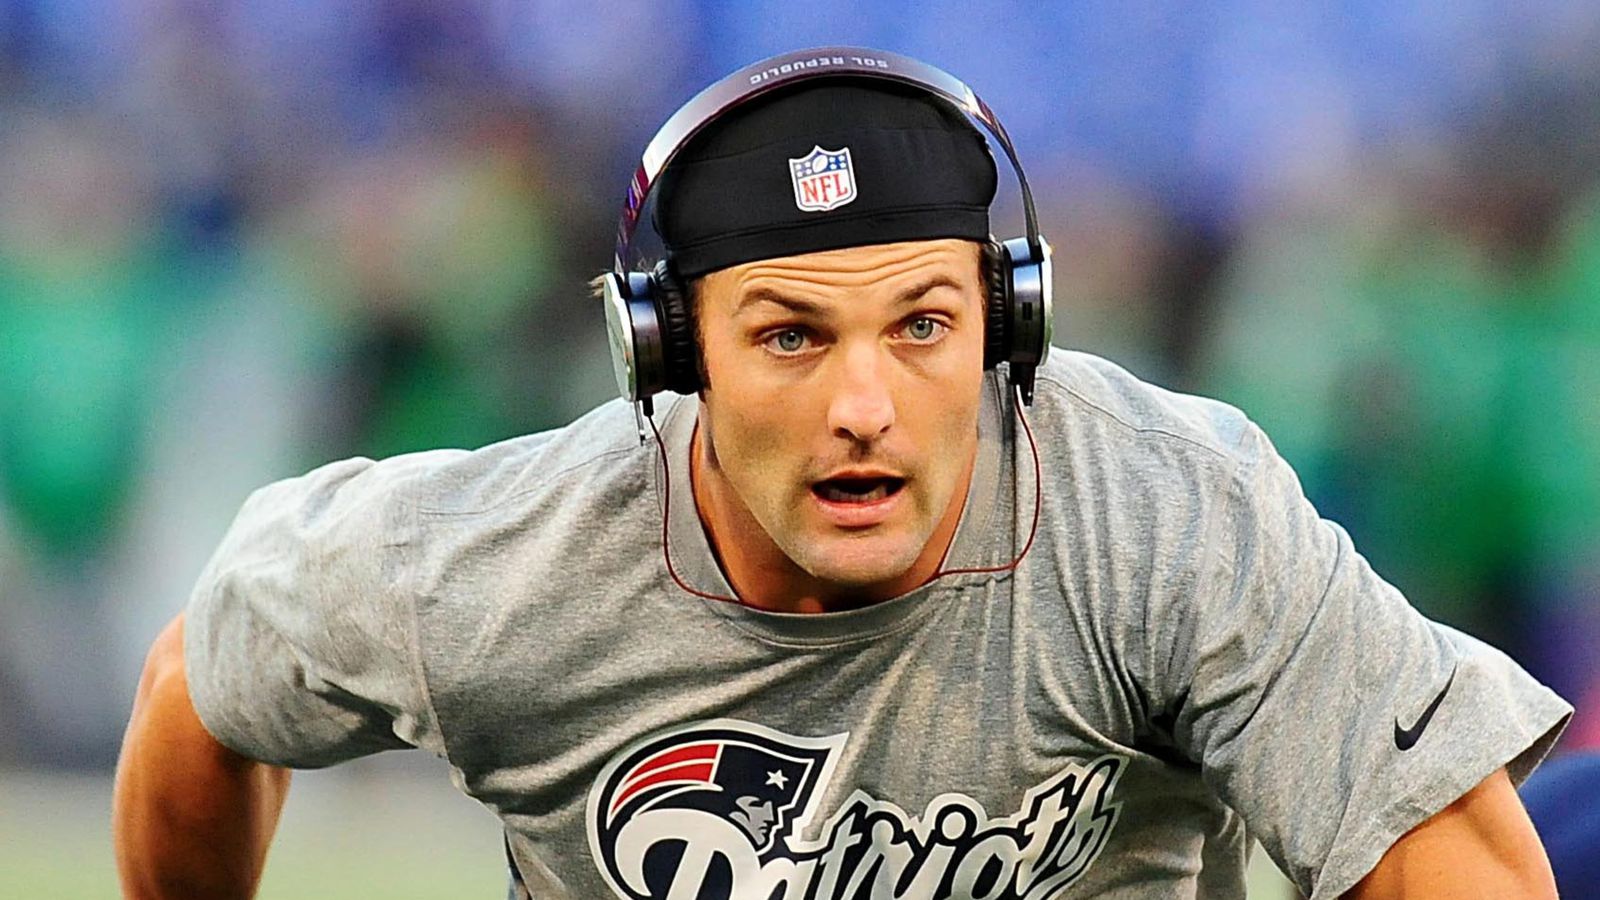 Report: Patriots May Sign Wes Welker to Extension - Pats Pulpit